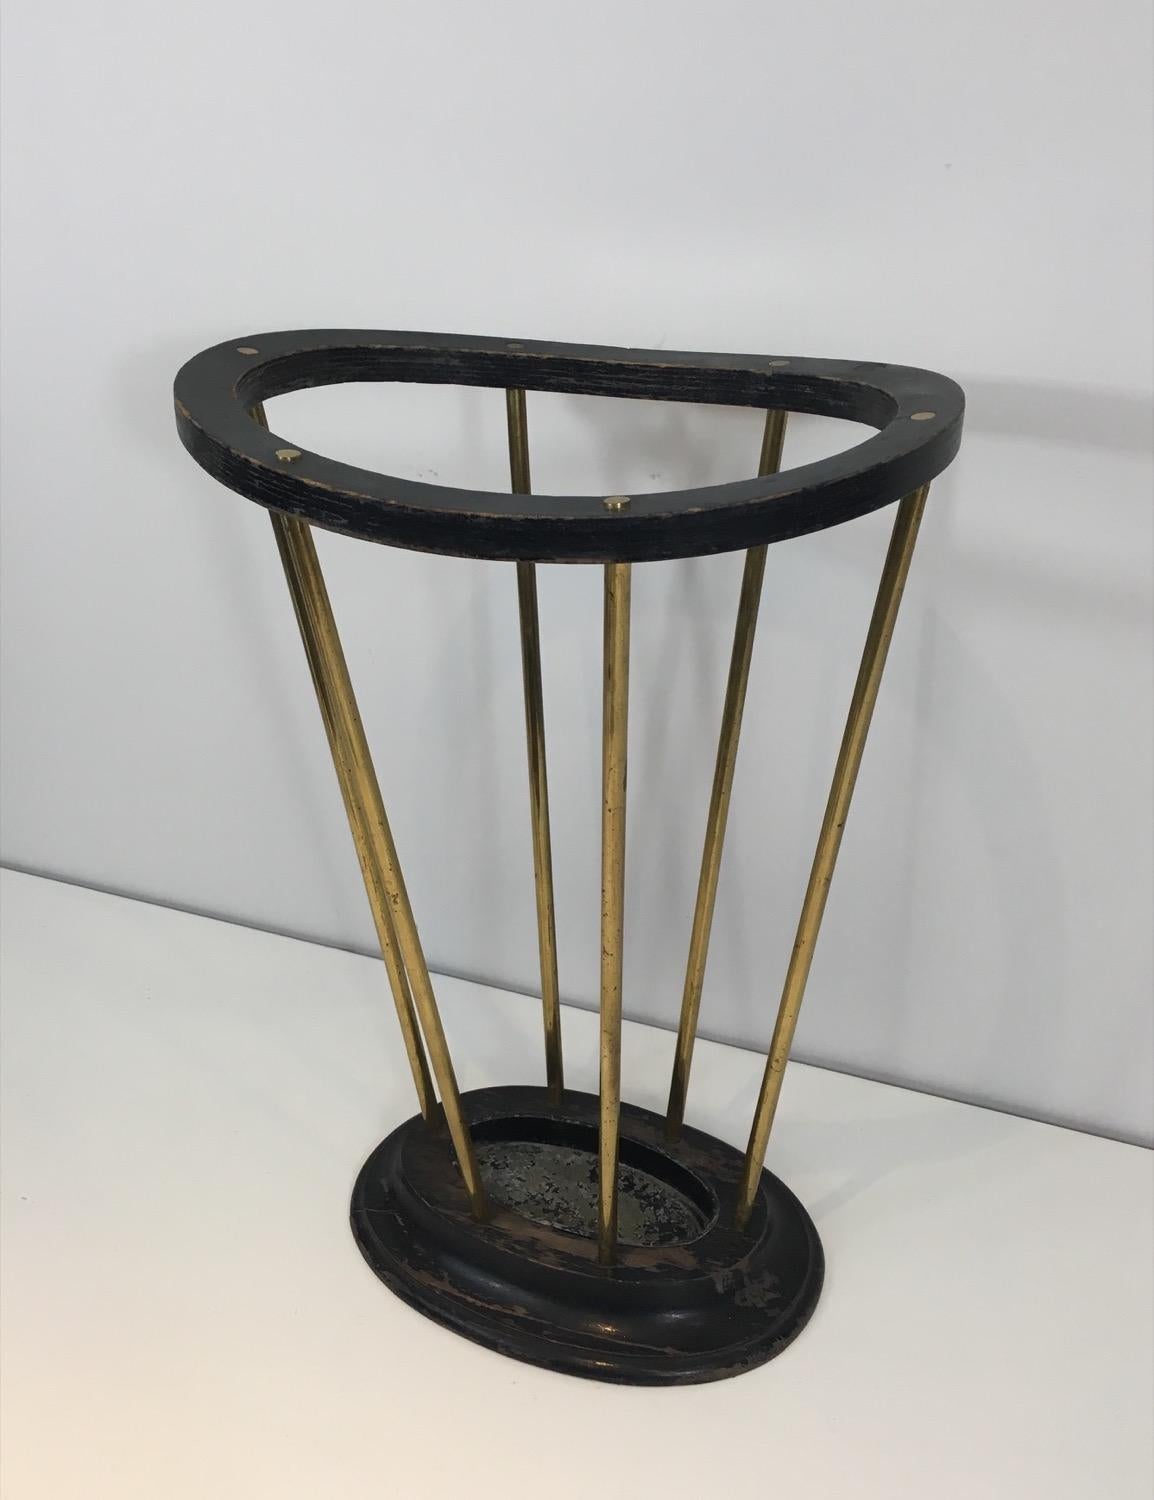 This very nice and rare umbrella stand is made of ebonized wood and brass. This is a French work. Circa 1950.